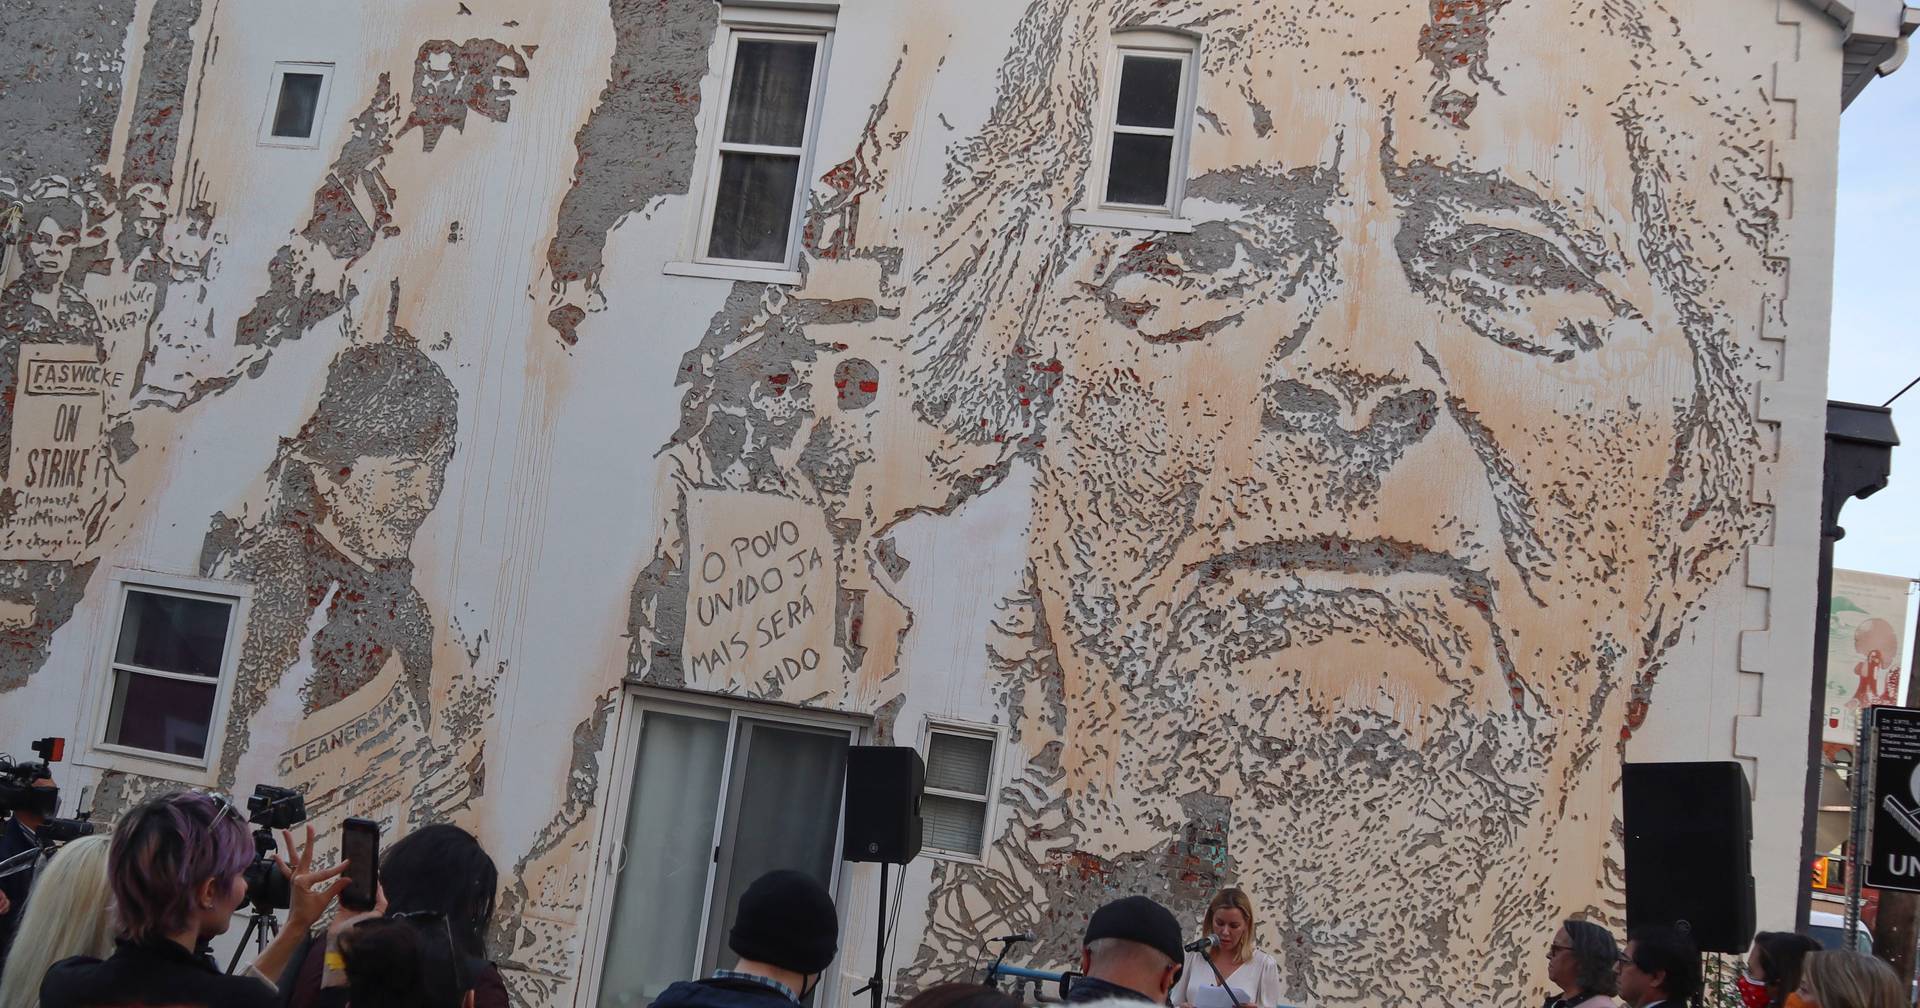 The Vhils mural pays homage to the Portuguese women’s trade union movement in Canada